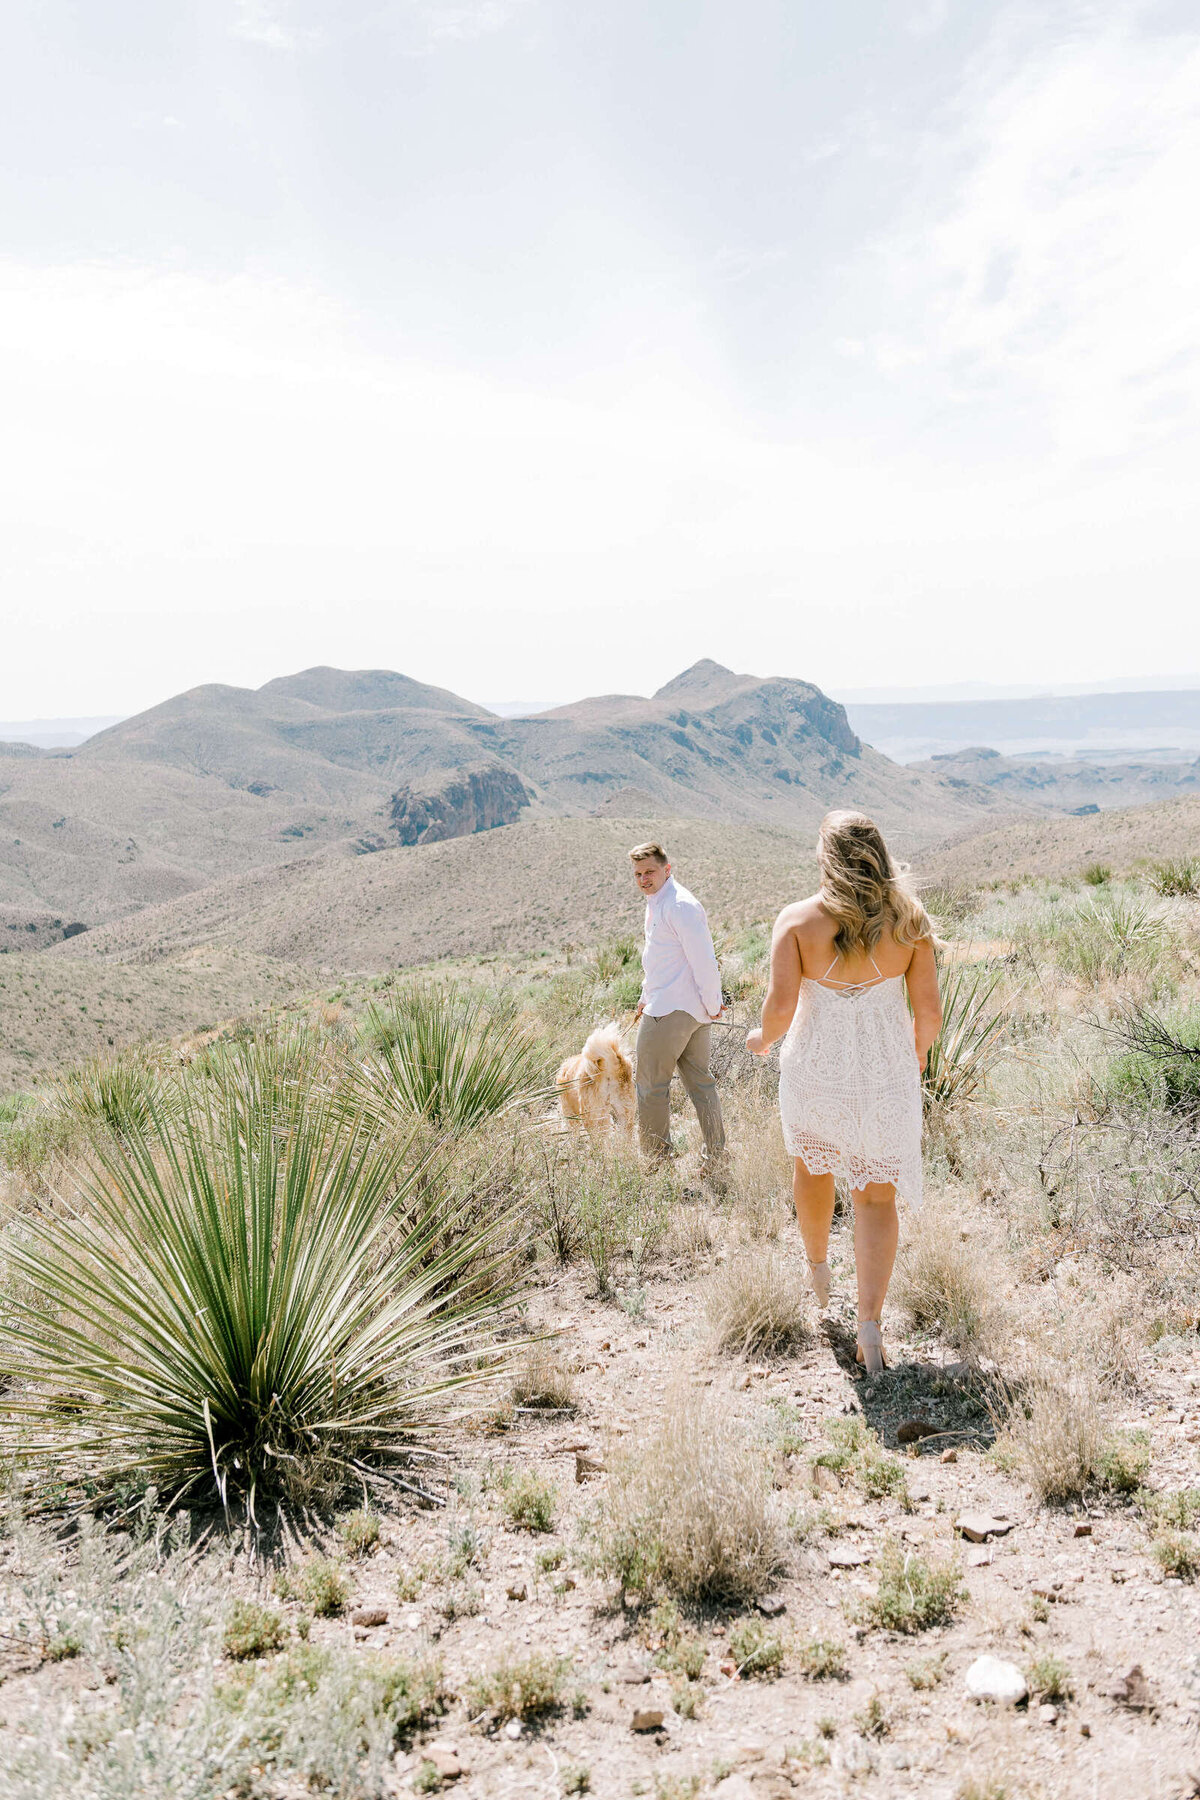 DFW Wedding Photographer Kate Panza_BigBend Engagement_Brittany_Carter_0600